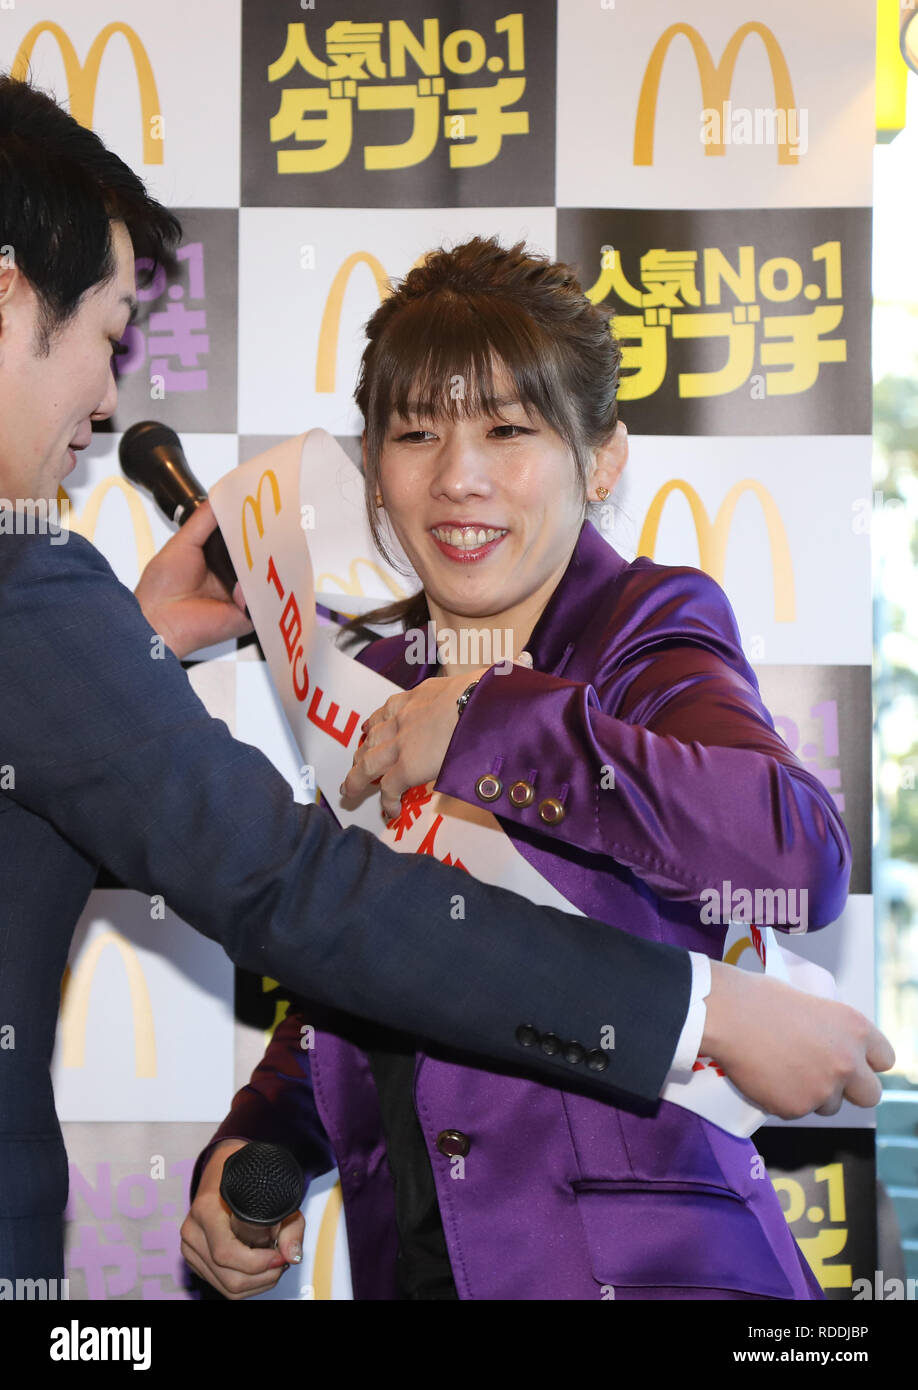 January 18, 2019, Tokyo, Japan - Three times Olympic wrestling gold medalist Saori Yoshida wears a sash as she acts as CEO-for-a-day of McDonald's restaurant chain at a McDonald's restaurant in Tokyo on Friday, January 18, 2019. Yoshida attended her first comercial event after she announced reirement from wrestling career last week.   (Photo by Yoshio Tsunoda/AFLO) Stock Photo